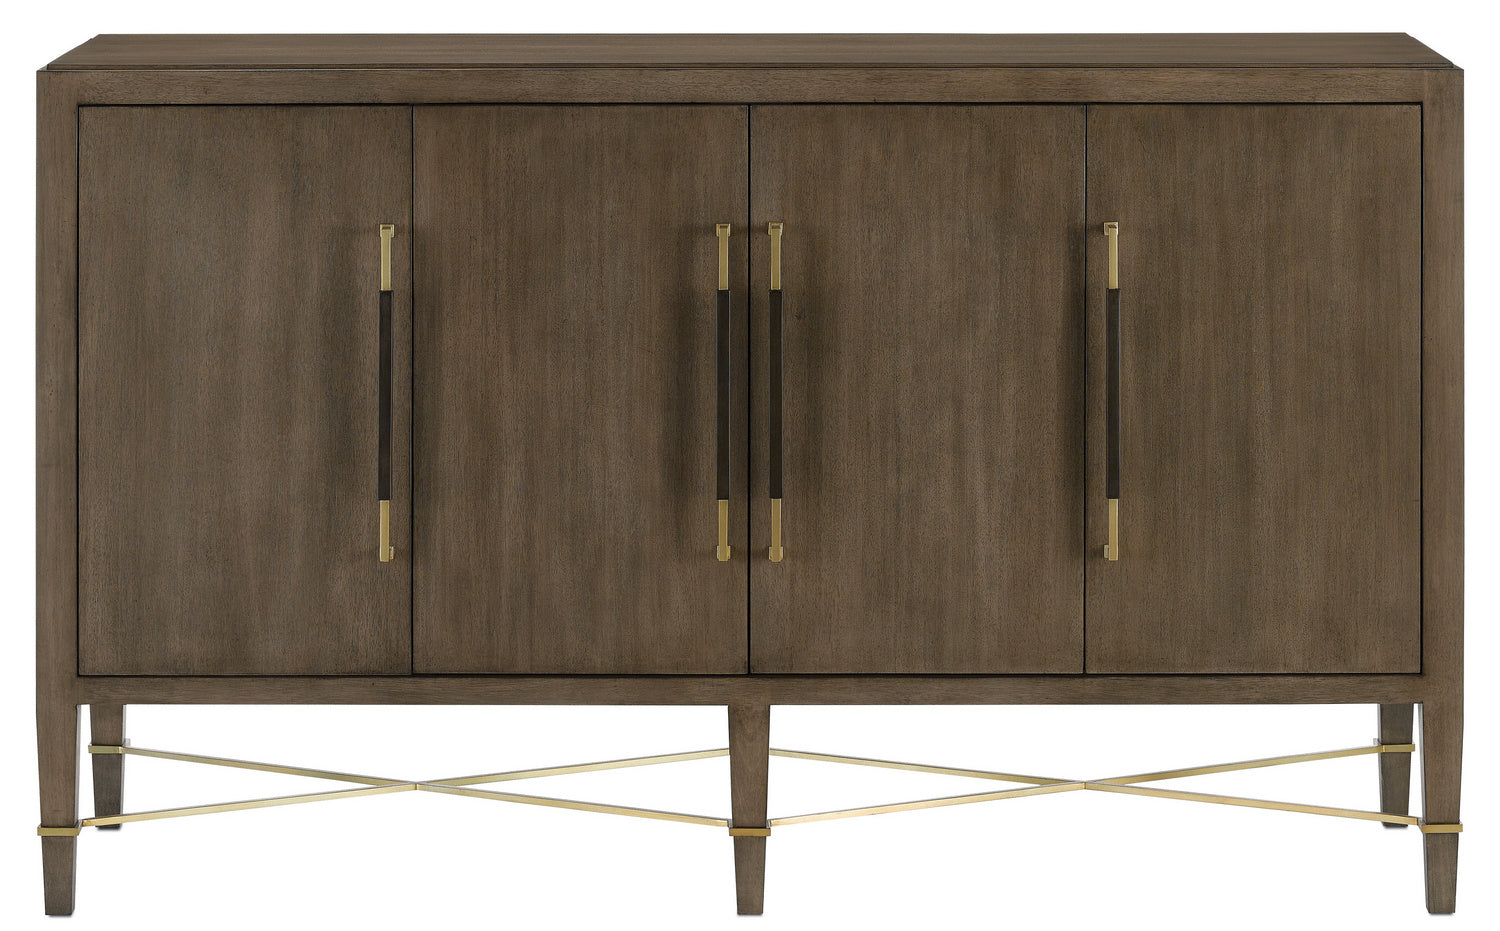 Sideboard from the Verona collection in Chanterelle/Coffee/Champagne finish